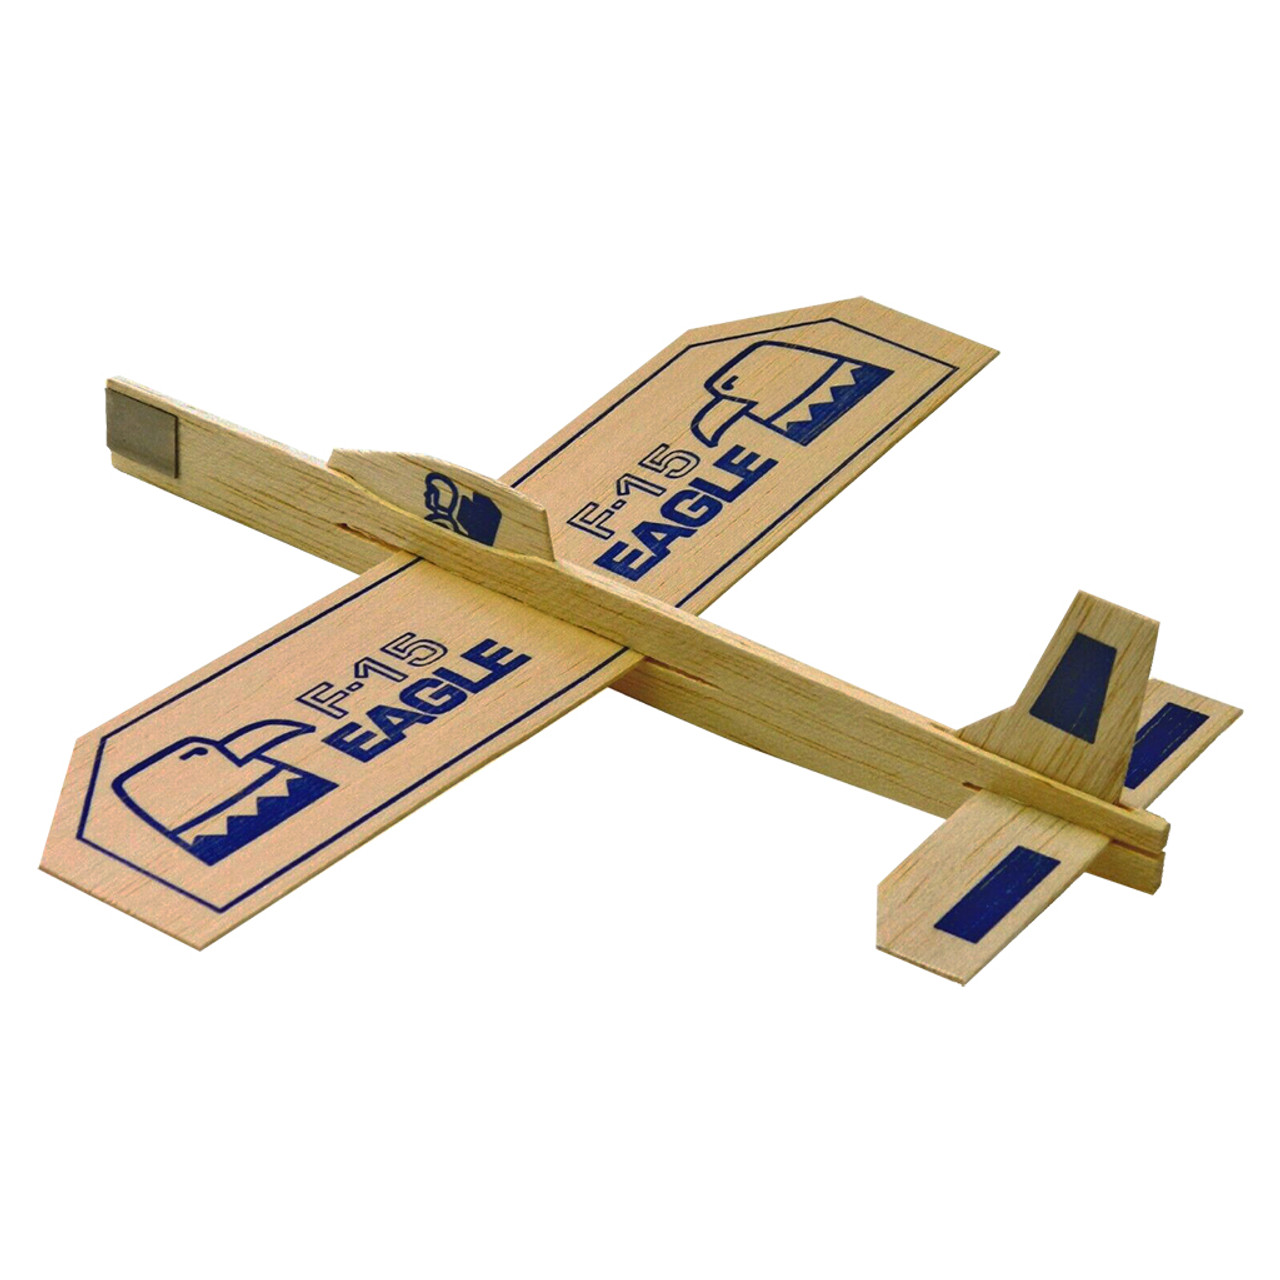 Guillow Eagle Balsa Glider | Midwest Technology